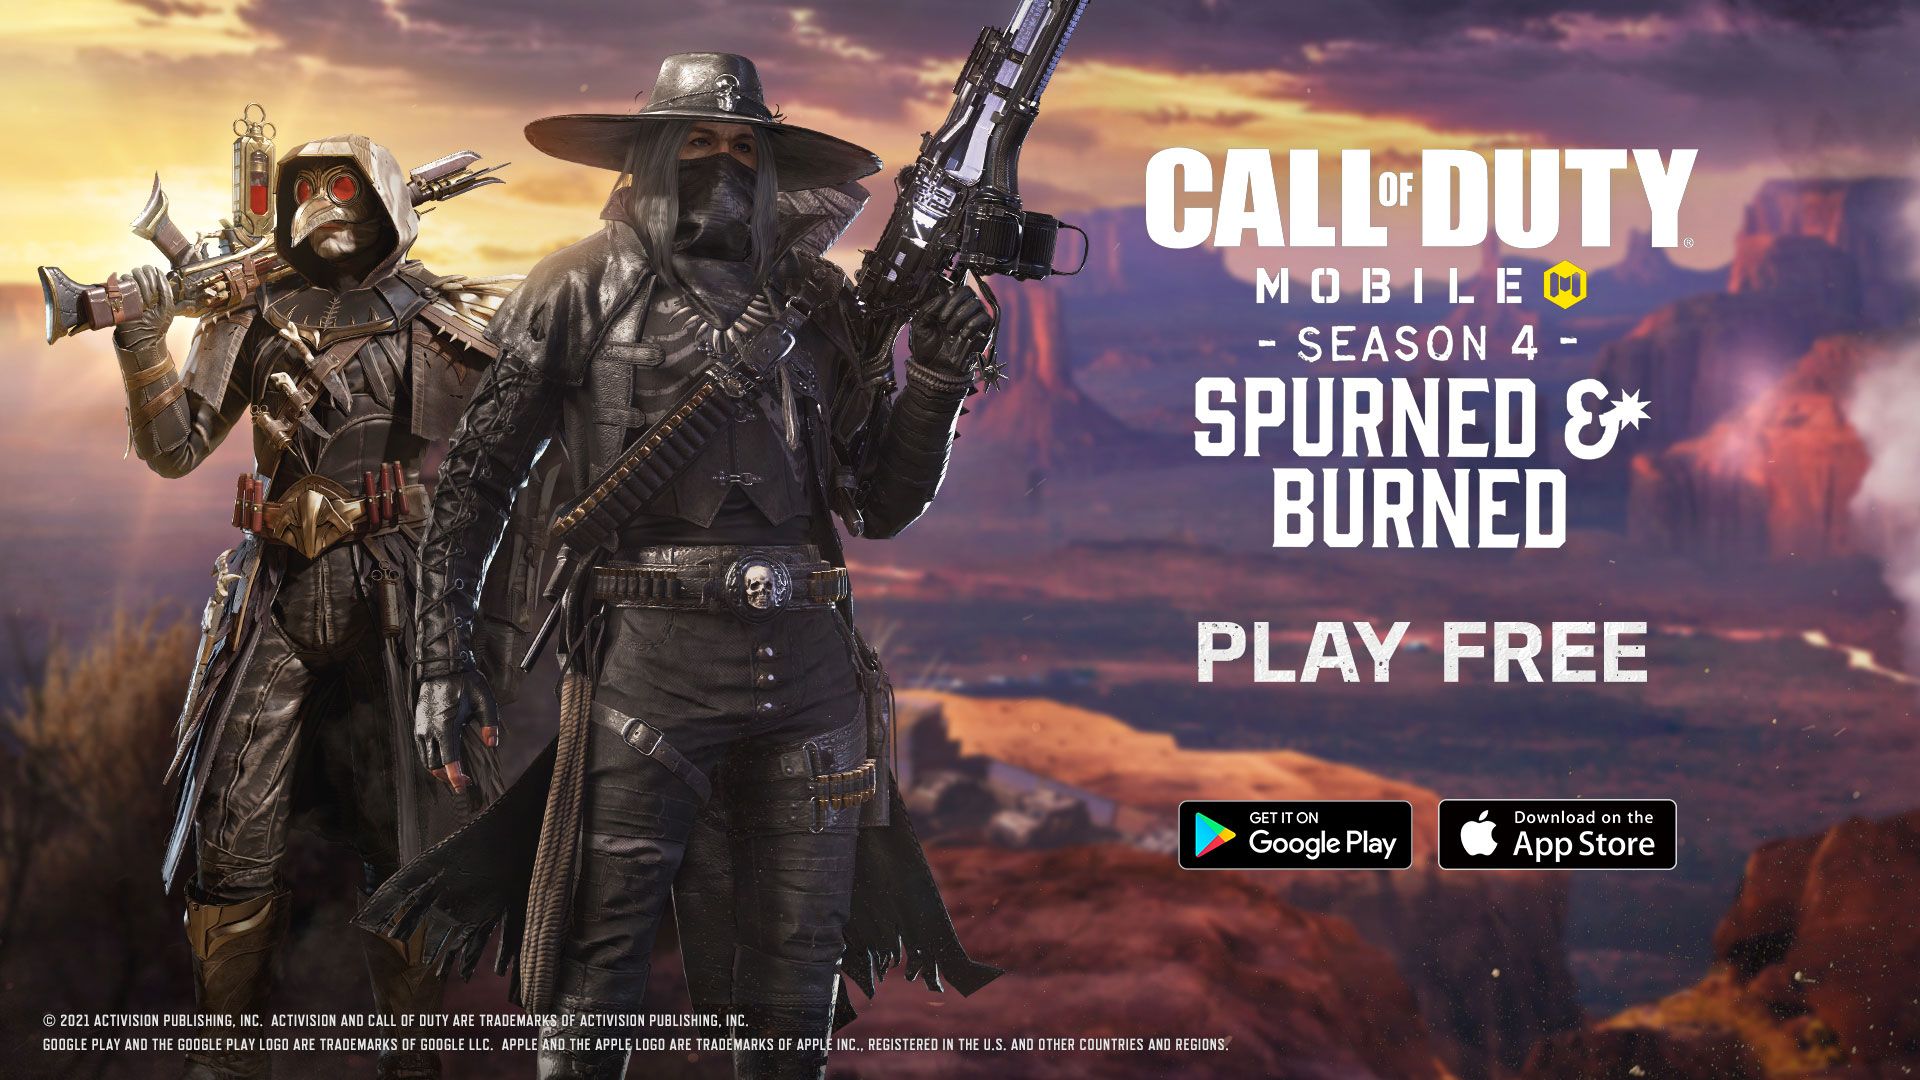 Announcement: Welcome to the Wild West in Spurned & Burned, Season 4 of Call of Duty®: Mobile